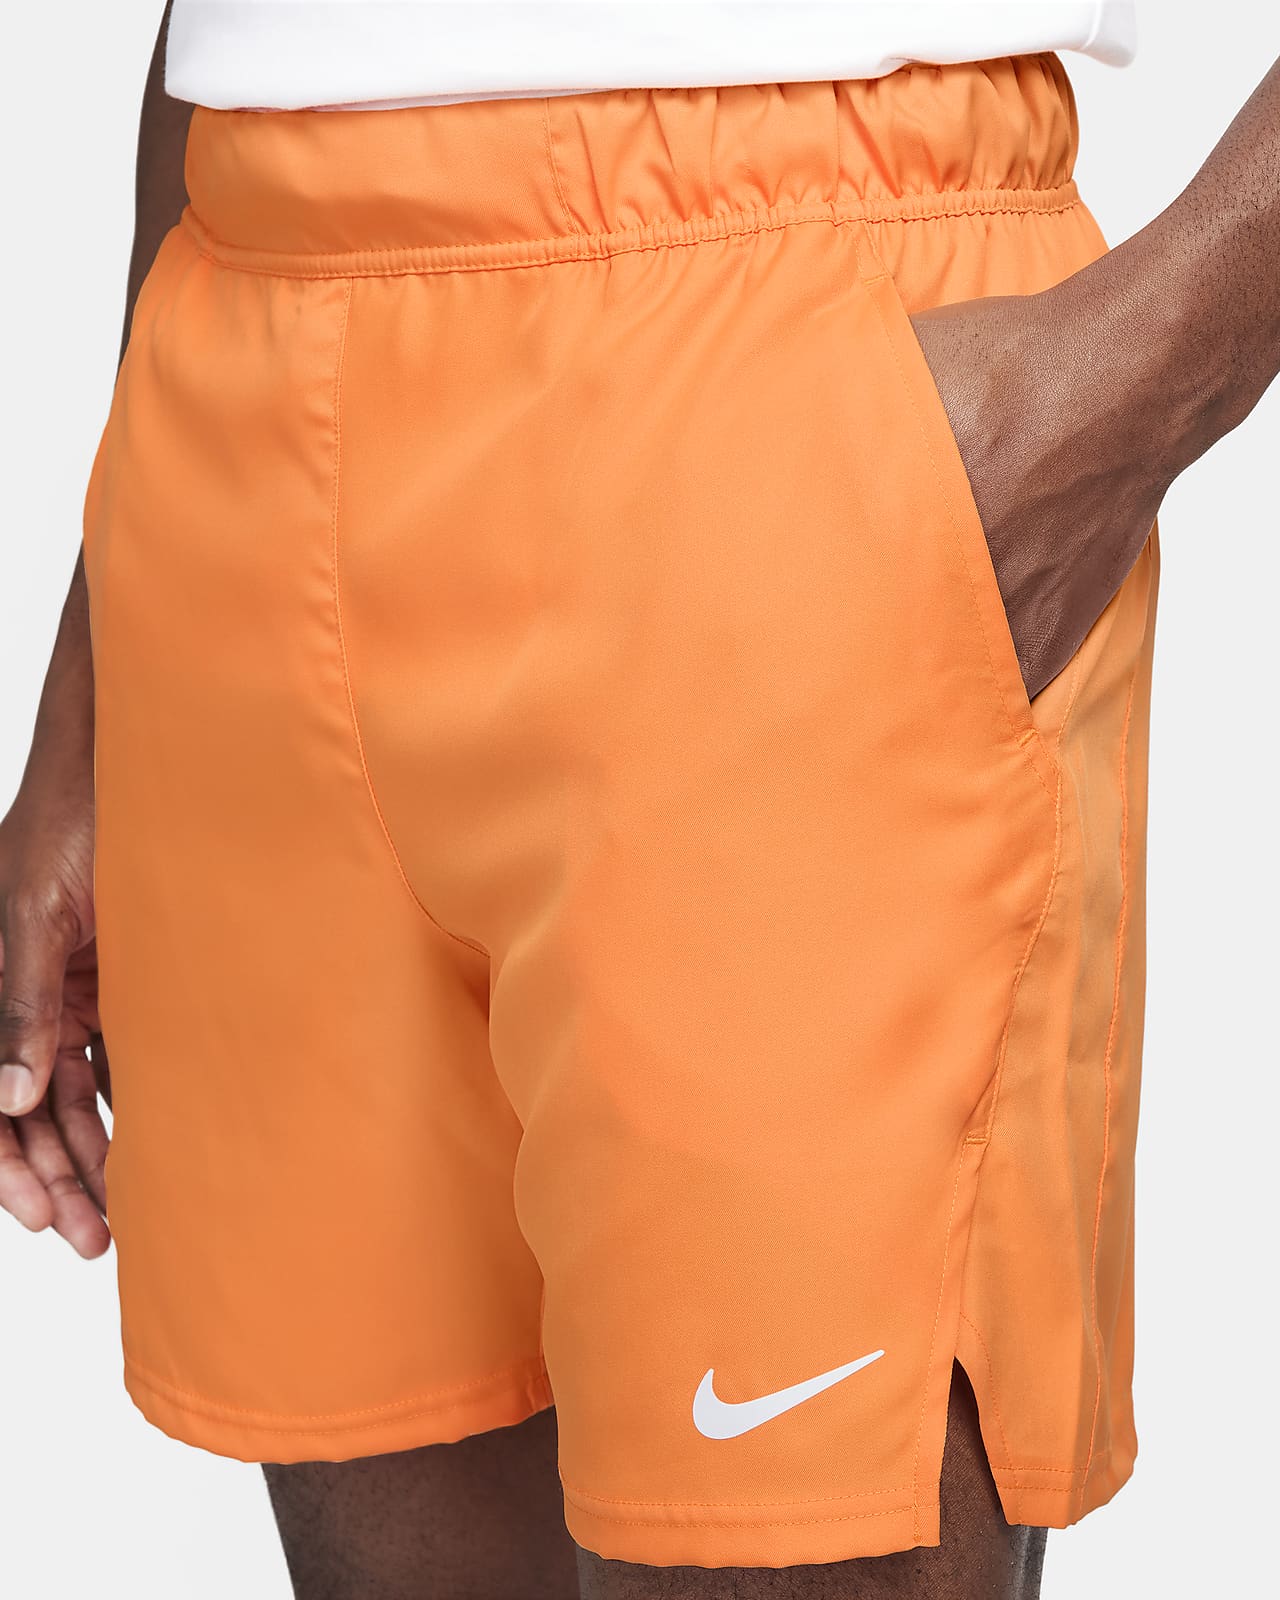 SHORT NIKE COURT DRY VICTORY 7IN - Nike - HOMME - VÊTEMENTS - TENNIS